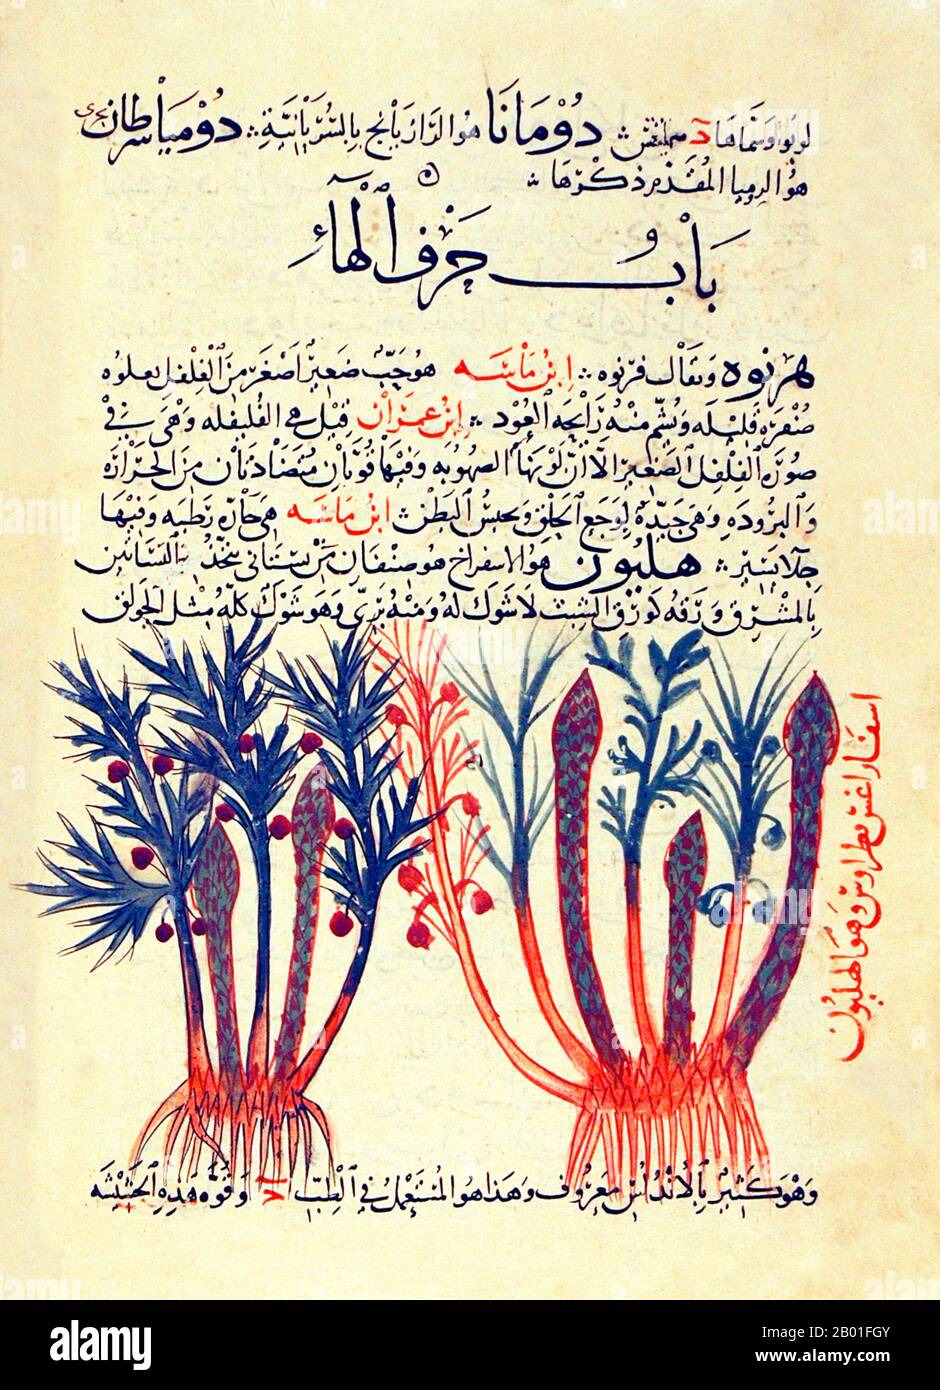 Spain/Andalusia: Two types of asparagus. Illuminated Arabic folio from Abu Ja 'far al-Ghafiqi's 'Herbal', c. 12th century.  Al-Ghafiqi, according to a thirteenth-century historian of Arab medicine, was the greatest savant of medicinal plants, their names and their properties, and his work had no equal in this field. This view was later confirmed by Max Meyerhof (d. 1945), the eminent historian of Islamic medicine, who stated that al-Ghafiqi was undoubtedly the greatest botanist and pharmacologist of the Islamic period. He hailed from Ghafiq, near Cordoba on the southern Iberian peninsula. Stock Photo